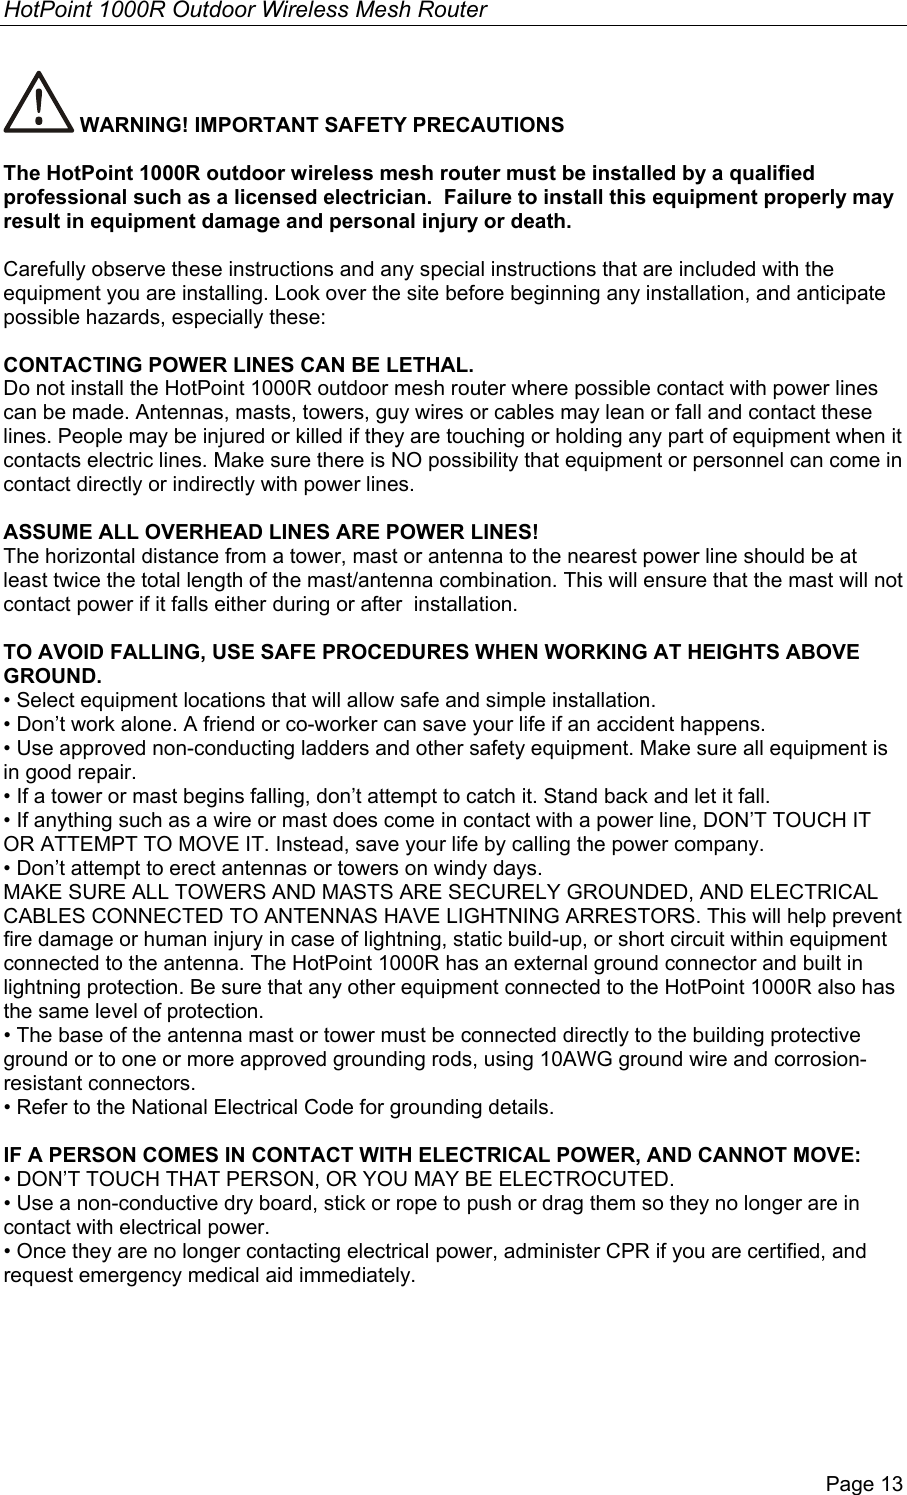 HotPoint 1000R Outdoor Wireless Mesh Router Page 13  WARNING! IMPORTANT SAFETY PRECAUTIONS  The HotPoint 1000R outdoor wireless mesh router must be installed by a qualified professional such as a licensed electrician.  Failure to install this equipment properly may result in equipment damage and personal injury or death.  Carefully observe these instructions and any special instructions that are included with the equipment you are installing. Look over the site before beginning any installation, and anticipate possible hazards, especially these:  CONTACTING POWER LINES CAN BE LETHAL. Do not install the HotPoint 1000R outdoor mesh router where possible contact with power lines can be made. Antennas, masts, towers, guy wires or cables may lean or fall and contact these lines. People may be injured or killed if they are touching or holding any part of equipment when it contacts electric lines. Make sure there is NO possibility that equipment or personnel can come in contact directly or indirectly with power lines.   ASSUME ALL OVERHEAD LINES ARE POWER LINES! The horizontal distance from a tower, mast or antenna to the nearest power line should be at least twice the total length of the mast/antenna combination. This will ensure that the mast will not contact power if it falls either during or after  installation.  TO AVOID FALLING, USE SAFE PROCEDURES WHEN WORKING AT HEIGHTS ABOVE GROUND. • Select equipment locations that will allow safe and simple installation. • Don’t work alone. A friend or co-worker can save your life if an accident happens. • Use approved non-conducting ladders and other safety equipment. Make sure all equipment is in good repair. • If a tower or mast begins falling, don’t attempt to catch it. Stand back and let it fall.  • If anything such as a wire or mast does come in contact with a power line, DON’T TOUCH IT OR ATTEMPT TO MOVE IT. Instead, save your life by calling the power company. • Don’t attempt to erect antennas or towers on windy days. MAKE SURE ALL TOWERS AND MASTS ARE SECURELY GROUNDED, AND ELECTRICAL CABLES CONNECTED TO ANTENNAS HAVE LIGHTNING ARRESTORS. This will help prevent fire damage or human injury in case of lightning, static build-up, or short circuit within equipment connected to the antenna. The HotPoint 1000R has an external ground connector and built in lightning protection. Be sure that any other equipment connected to the HotPoint 1000R also has the same level of protection. • The base of the antenna mast or tower must be connected directly to the building protective ground or to one or more approved grounding rods, using 10AWG ground wire and corrosion-resistant connectors.  • Refer to the National Electrical Code for grounding details.  IF A PERSON COMES IN CONTACT WITH ELECTRICAL POWER, AND CANNOT MOVE: • DON’T TOUCH THAT PERSON, OR YOU MAY BE ELECTROCUTED. • Use a non-conductive dry board, stick or rope to push or drag them so they no longer are in contact with electrical power. • Once they are no longer contacting electrical power, administer CPR if you are certified, and request emergency medical aid immediately. 